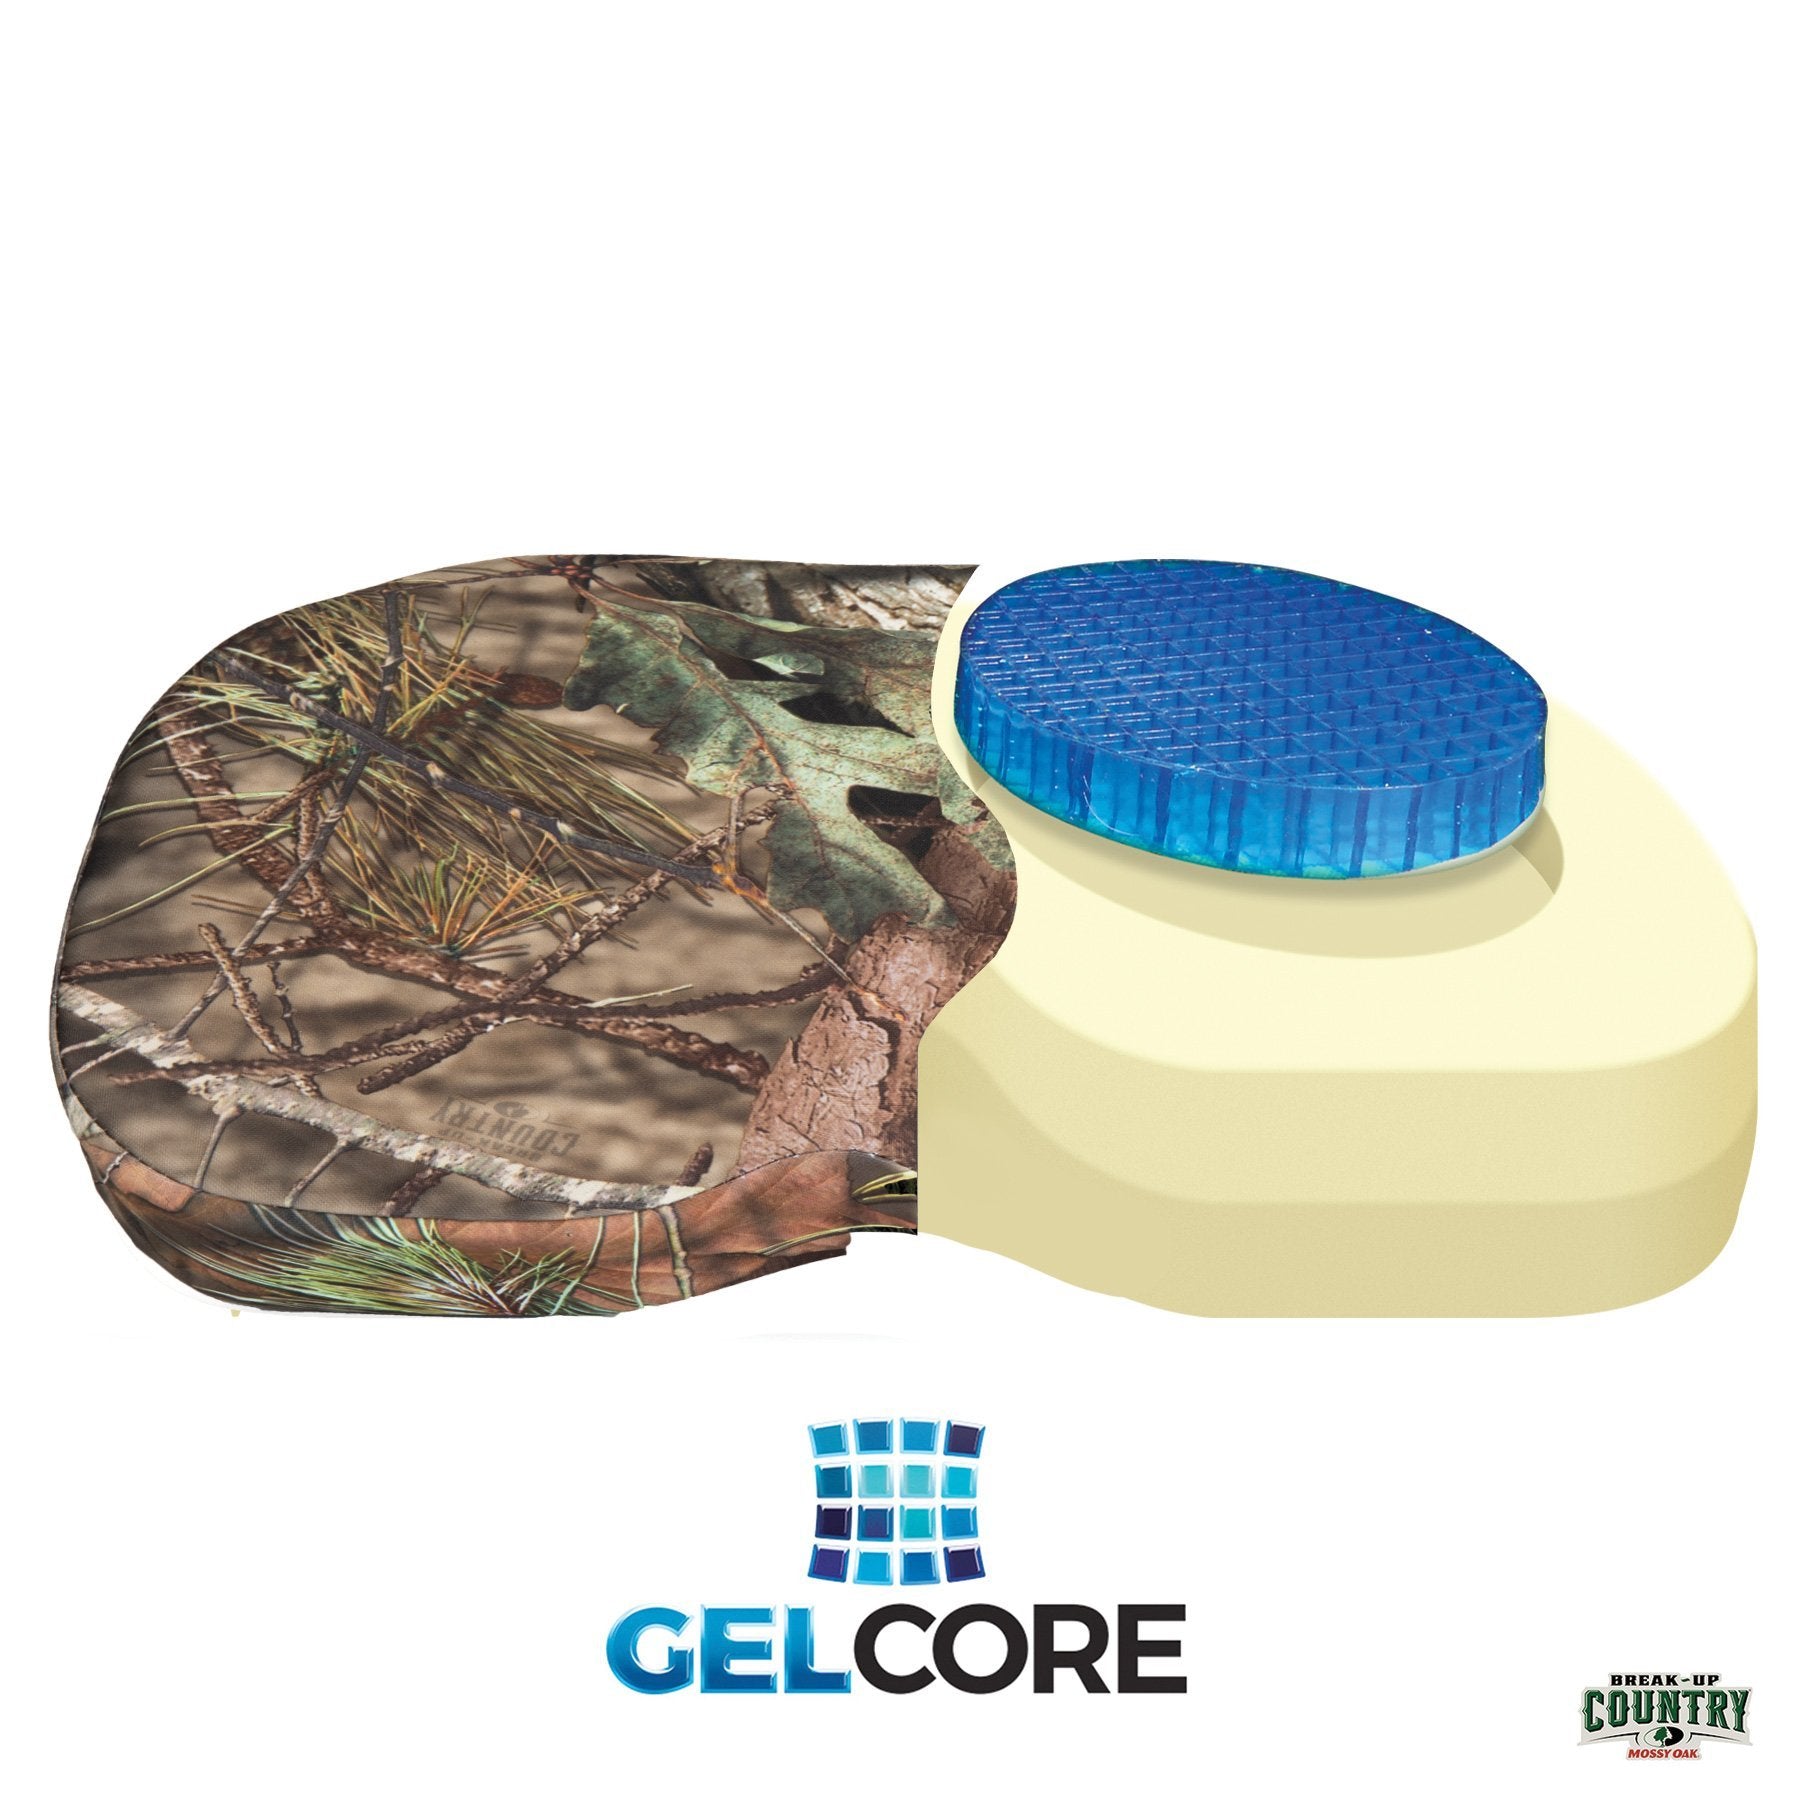 Tail Mate GelCore Cushion - Shadow Hunter Blinds